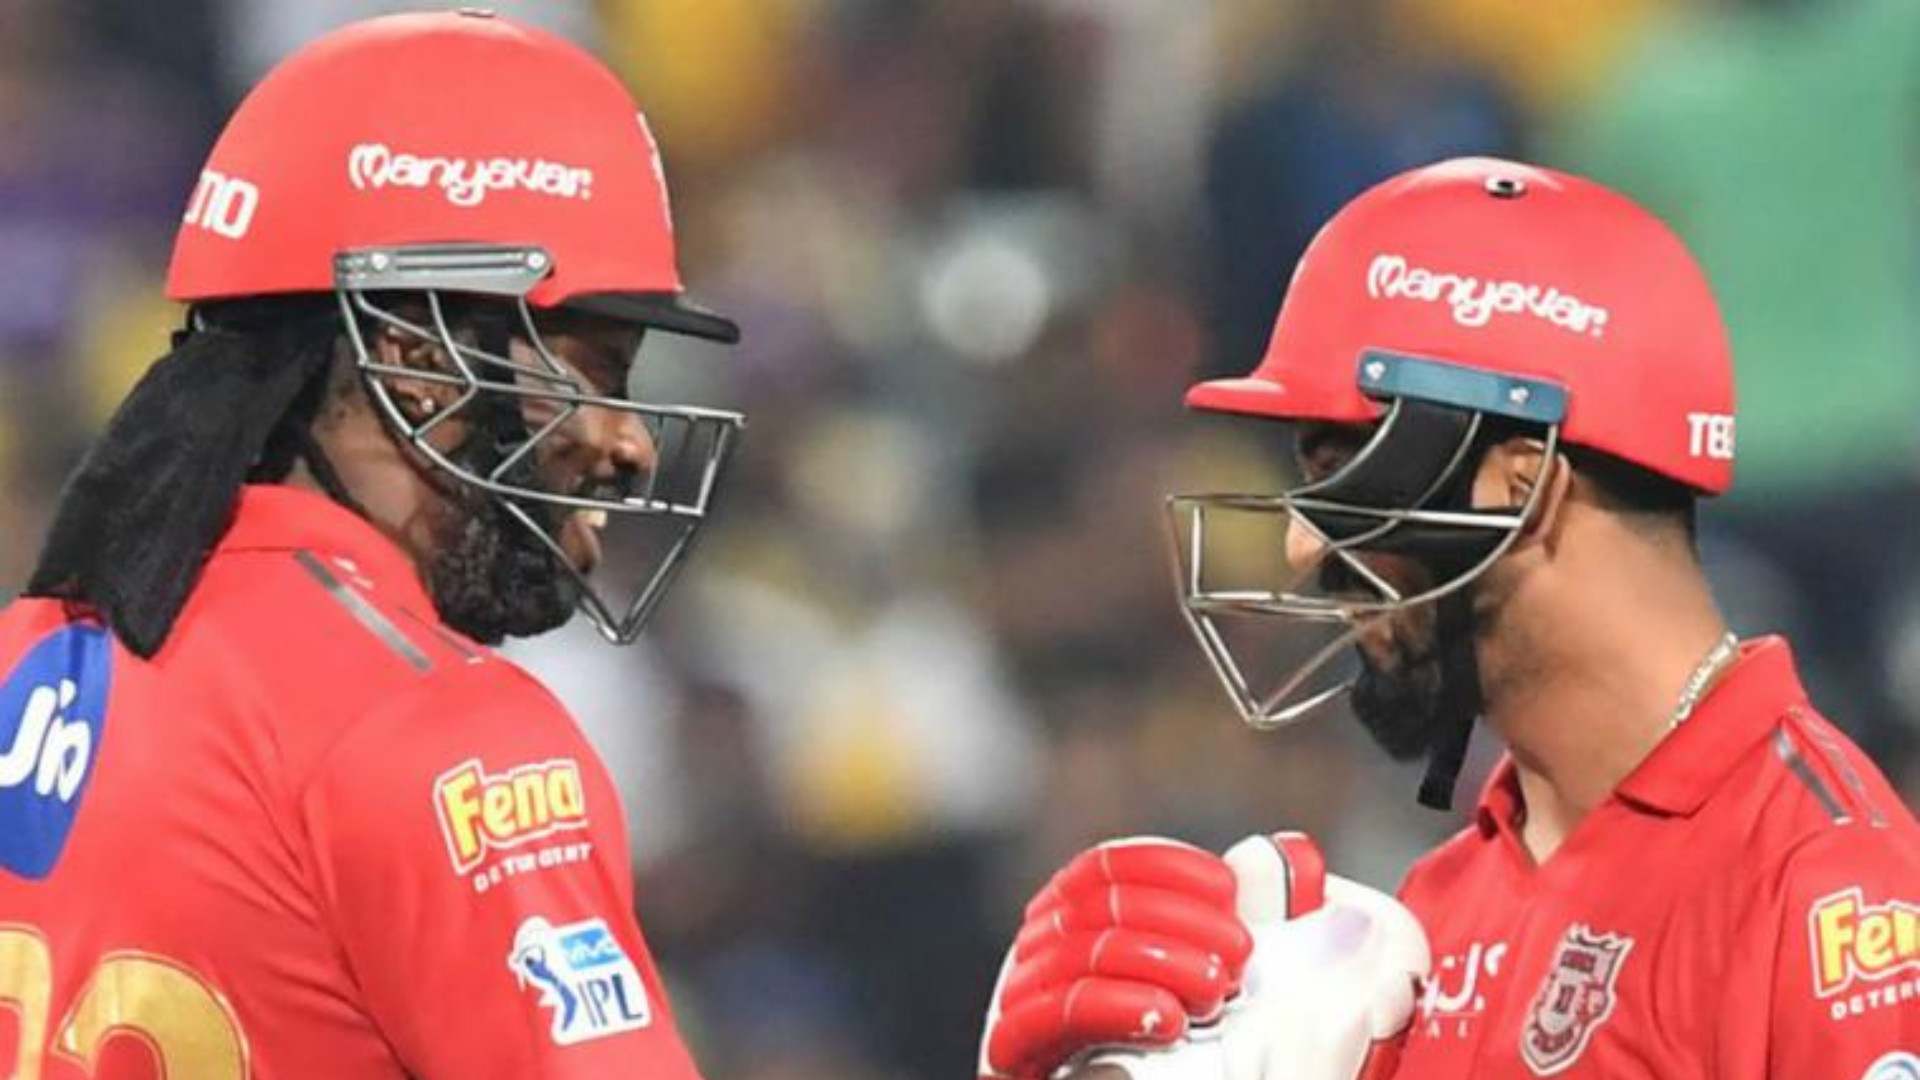 KL Rahul and Chris Gayle in a file photo. (Image credit: Twitter)